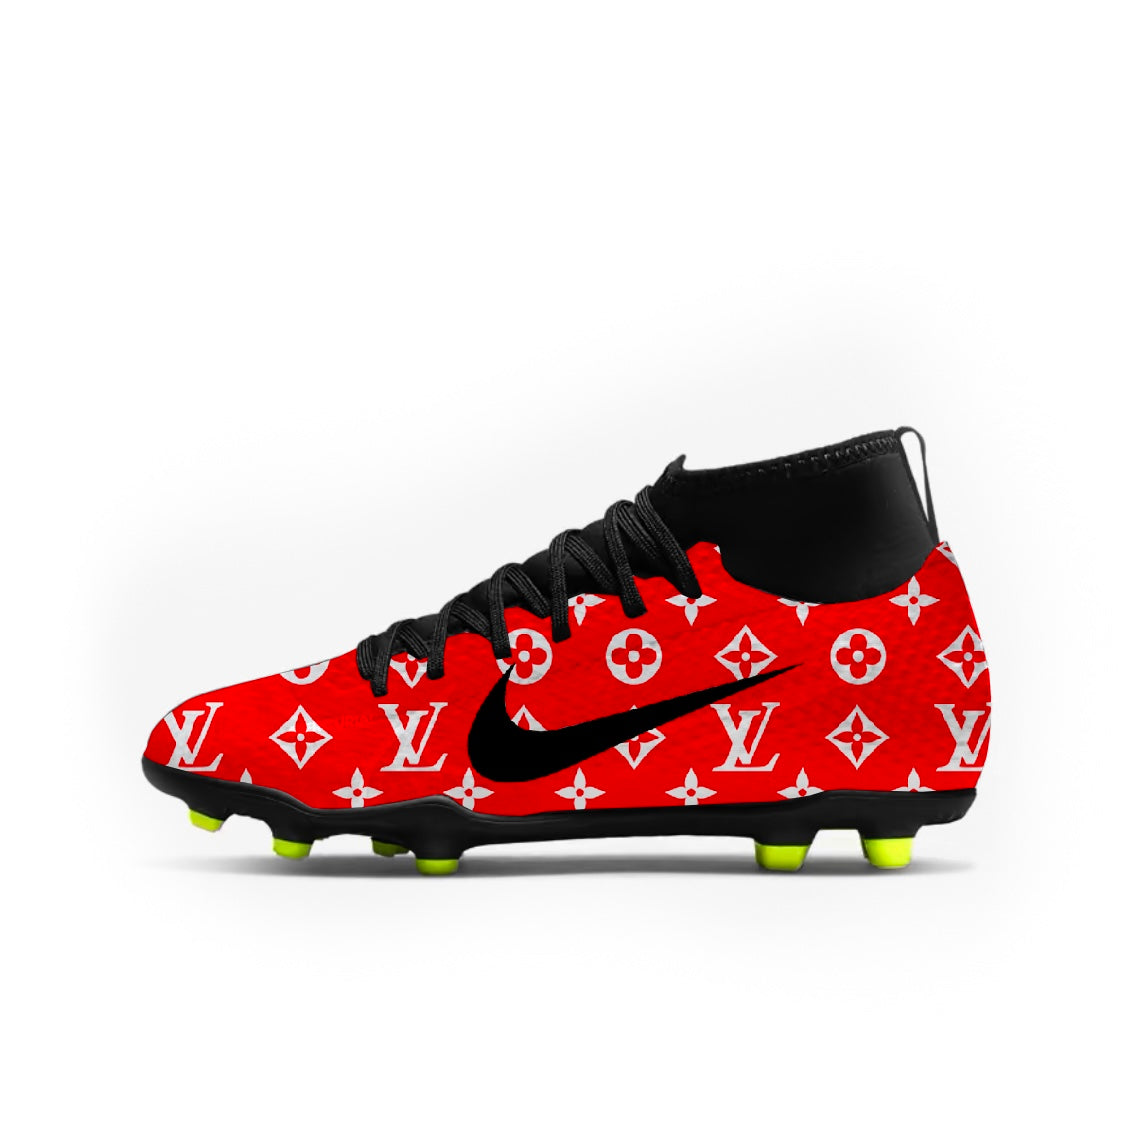 Designer Nike Youth Football Cleats 3.5Y / Red